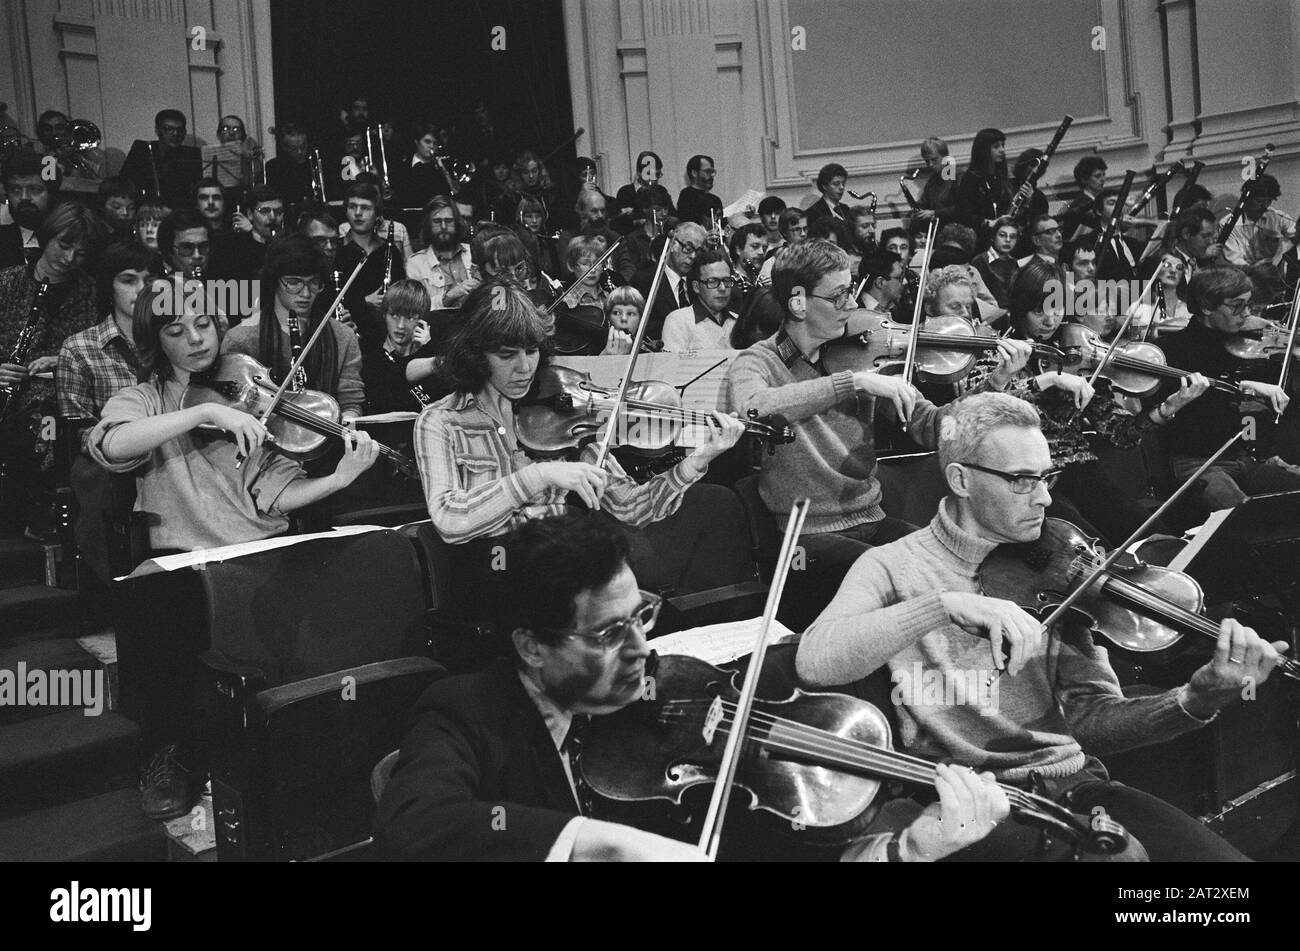 Biggest symphony orchestra (415 men) in connection with 100th Fur Elise broadcast in Concertgebouw; largest symphony orchestra of all time Date: December 10, 1978 Keywords: orchestras, broadcasts Institution name: Concertgebouw Stock Photo